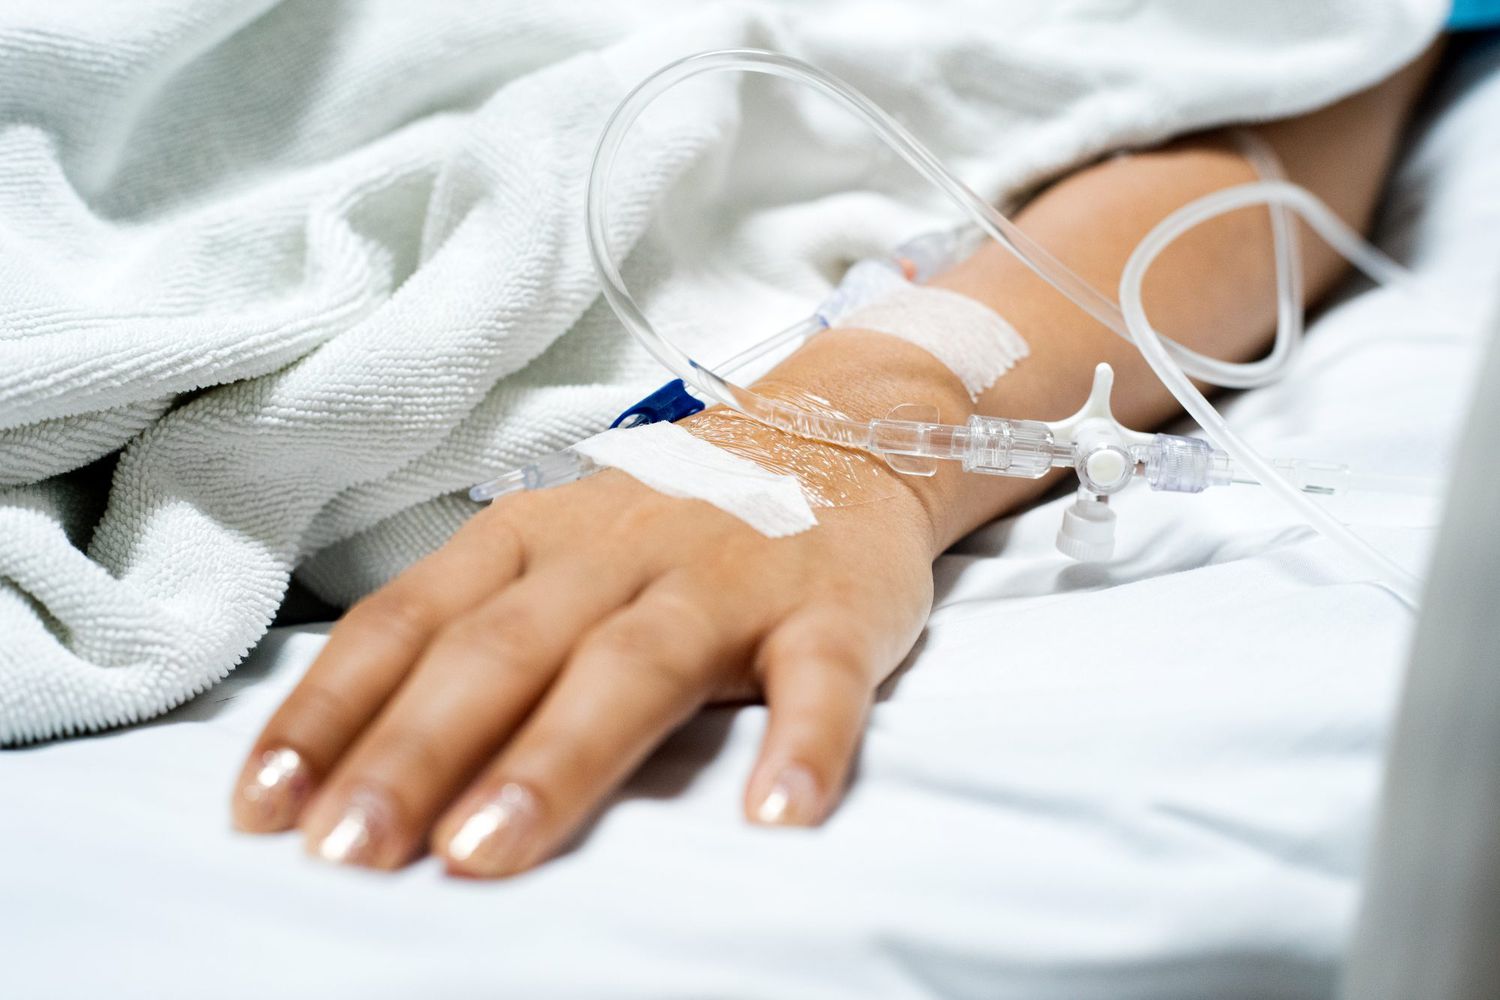 An image of a hand on a hospital bed.